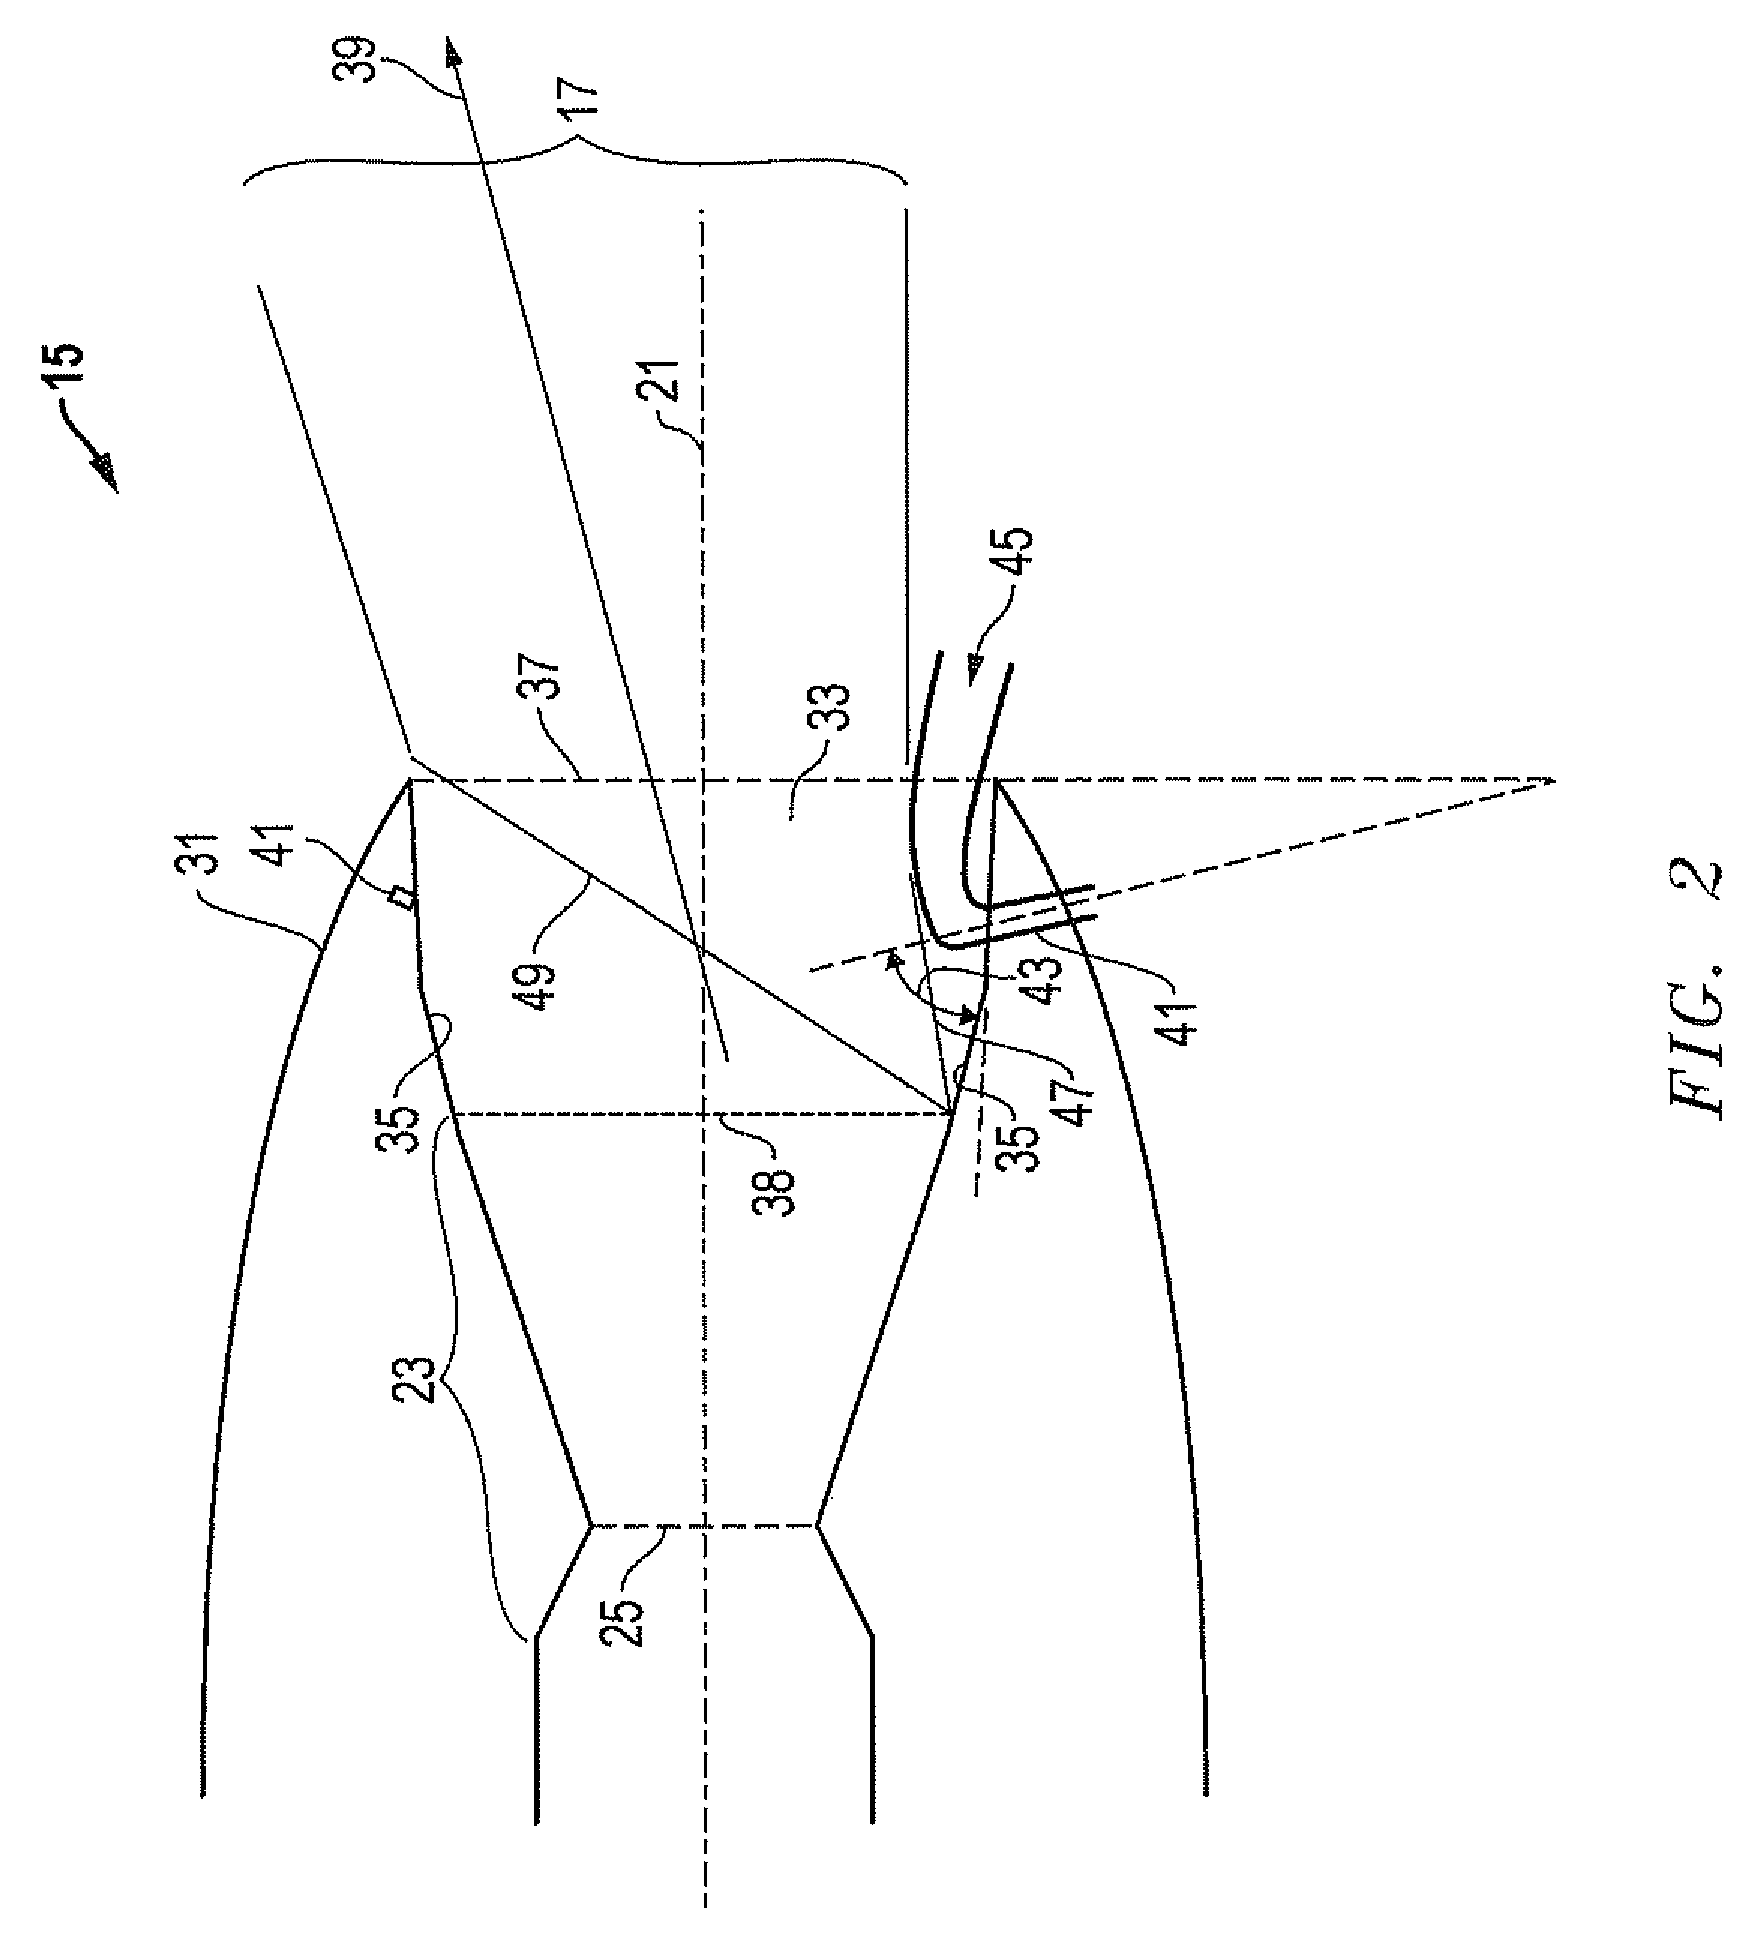 System and apparatus for vectoring nozzle exhaust plume from a nozzle